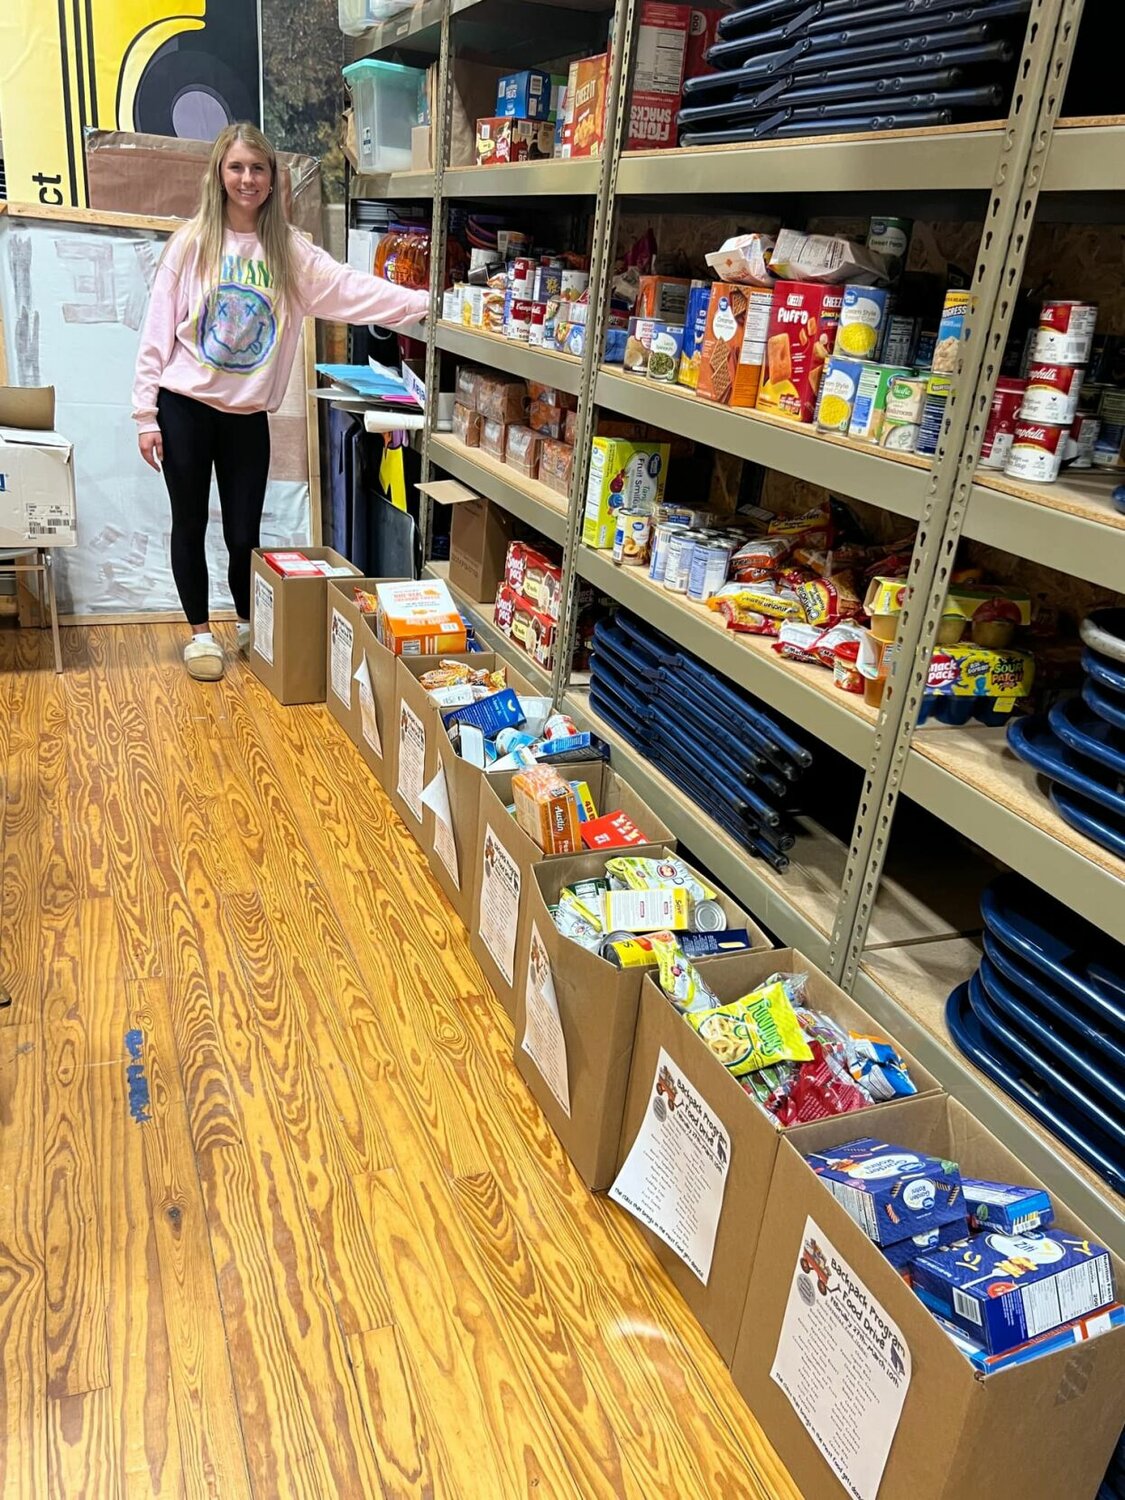 "At a young age I remember helping my mom pack the backpacks that would go out every Friday." Manary recalled as she spent some of her Spring Break this year sorting and putting away all the items the students of Webster and Shook donated for her senior project food drive.